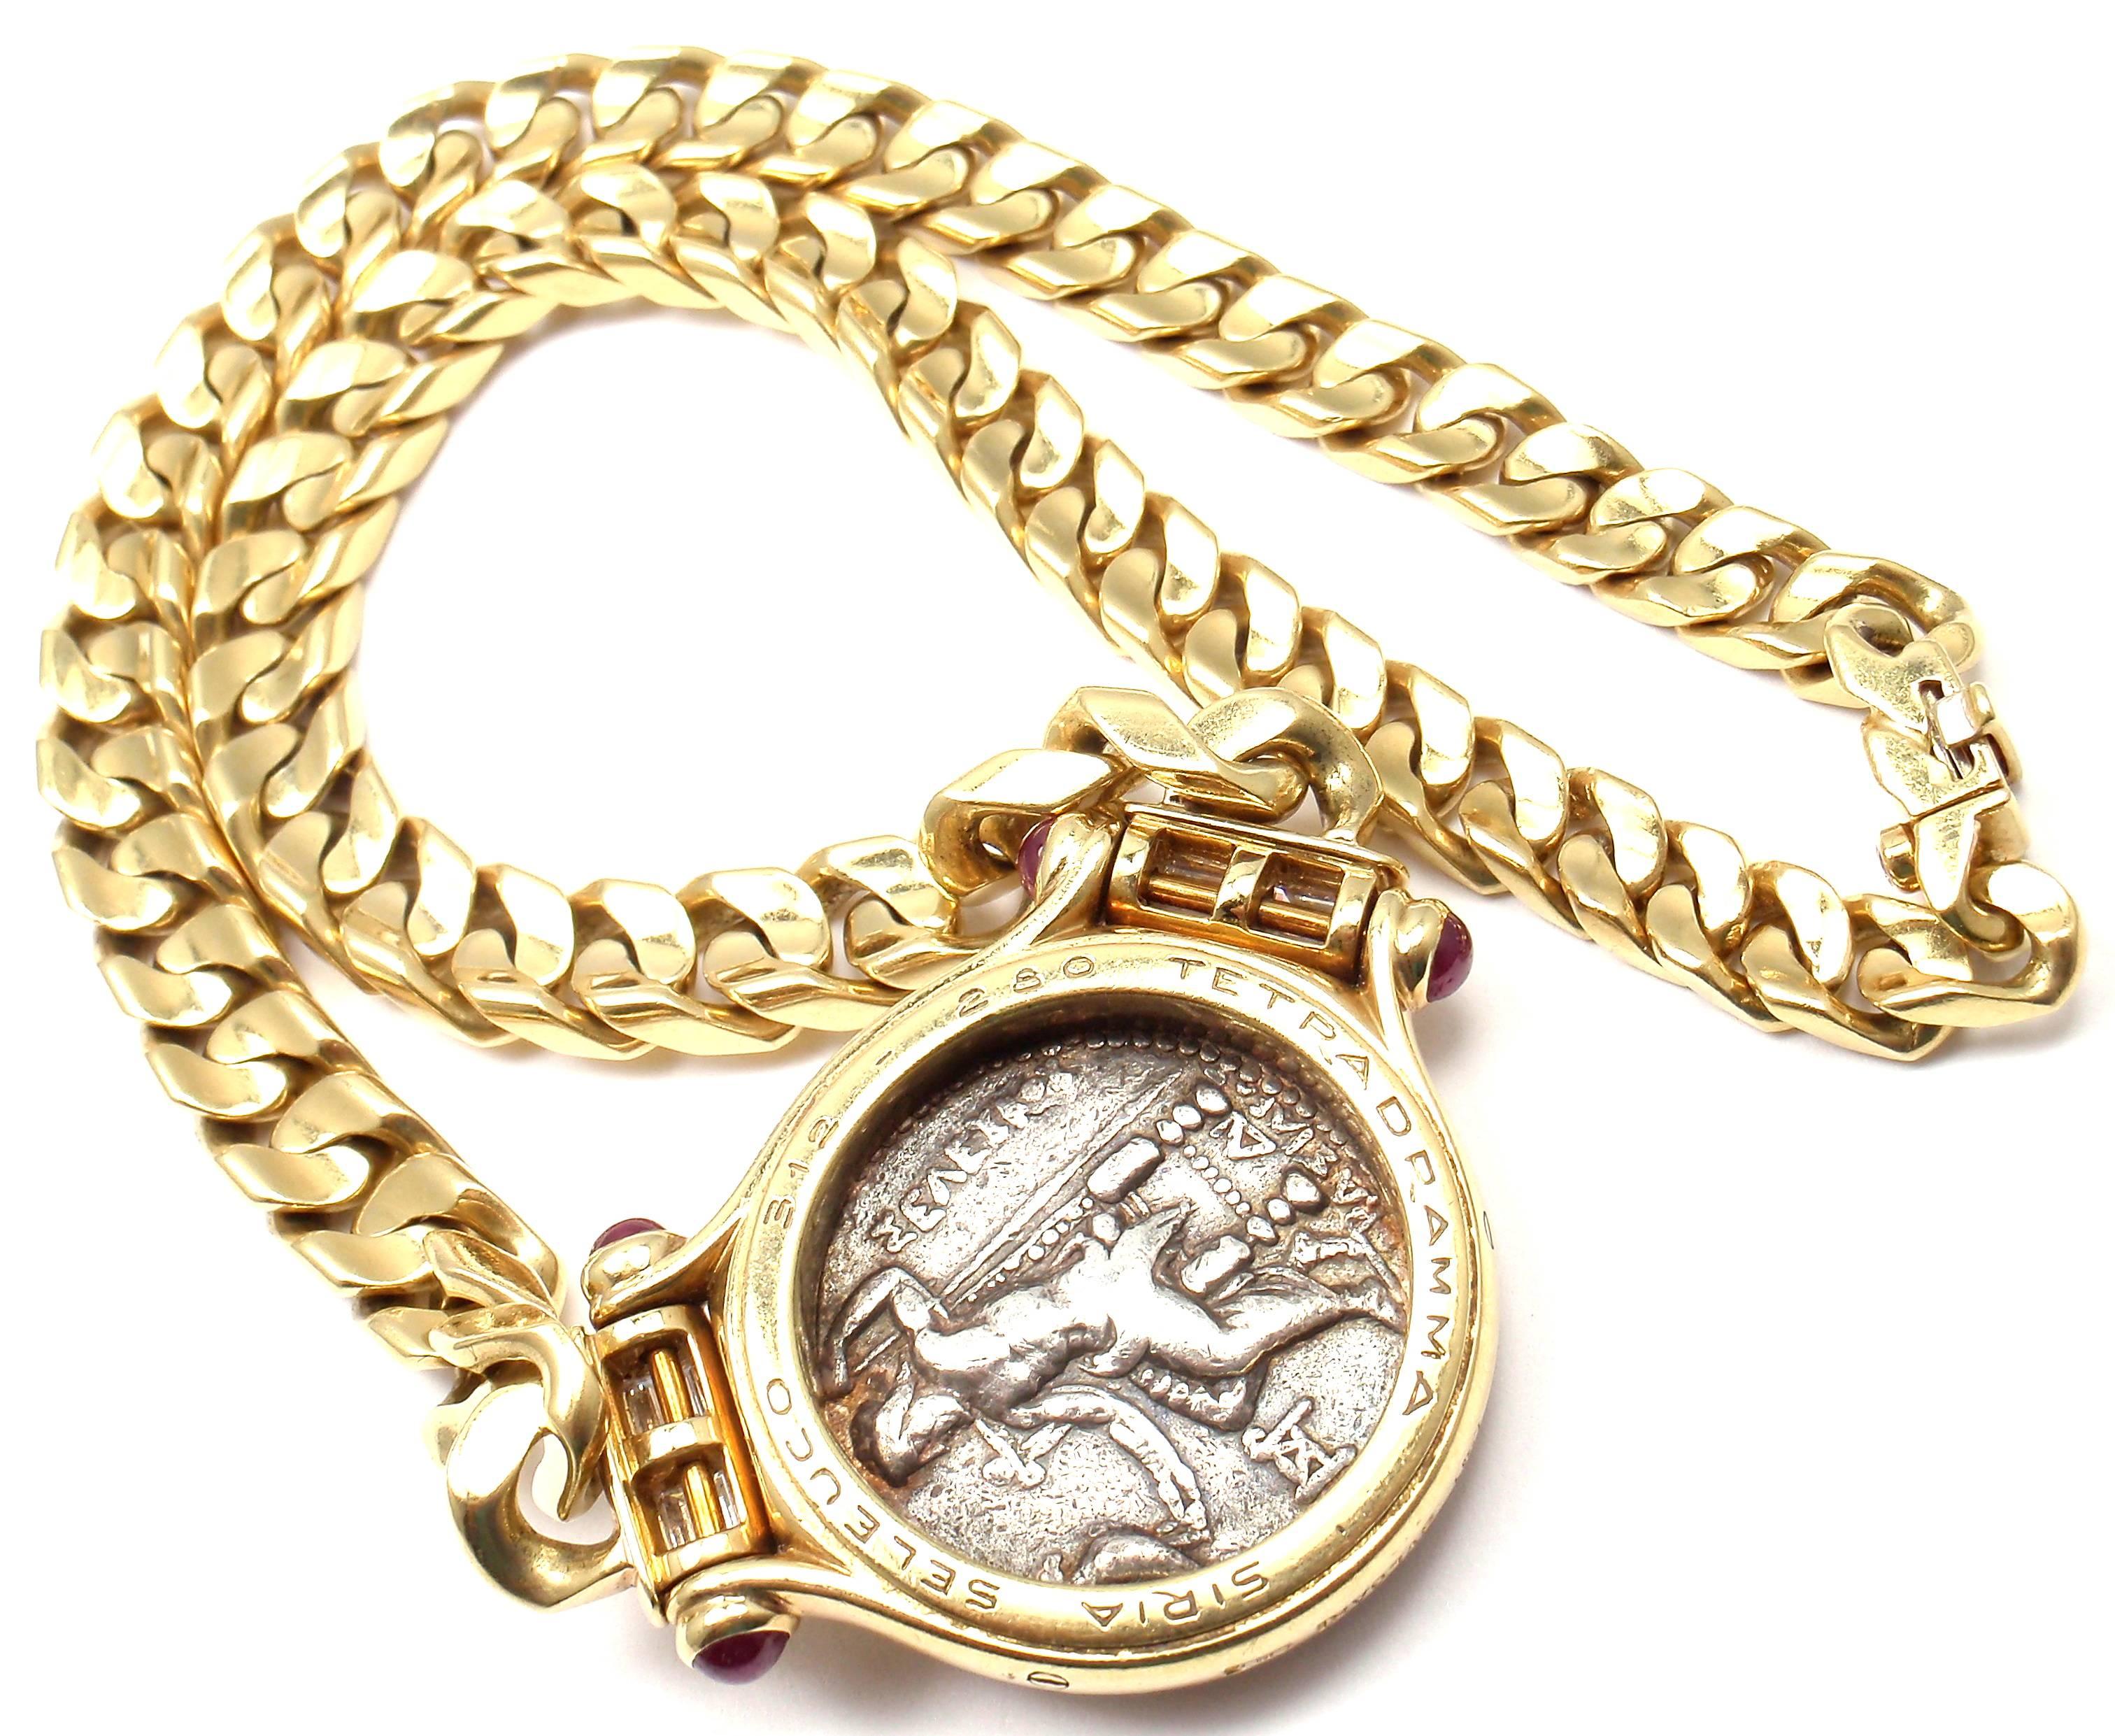 Bulgari yellow gold diamond and ruby ancient coin, link chain necklace.
With 1 Large Ancient Coin Siria Seleuco Tetradramma 312-280
8 VS1 clarity, G color diamonds 
4 cabochon rubies

This necklace comes with the original Bulgari